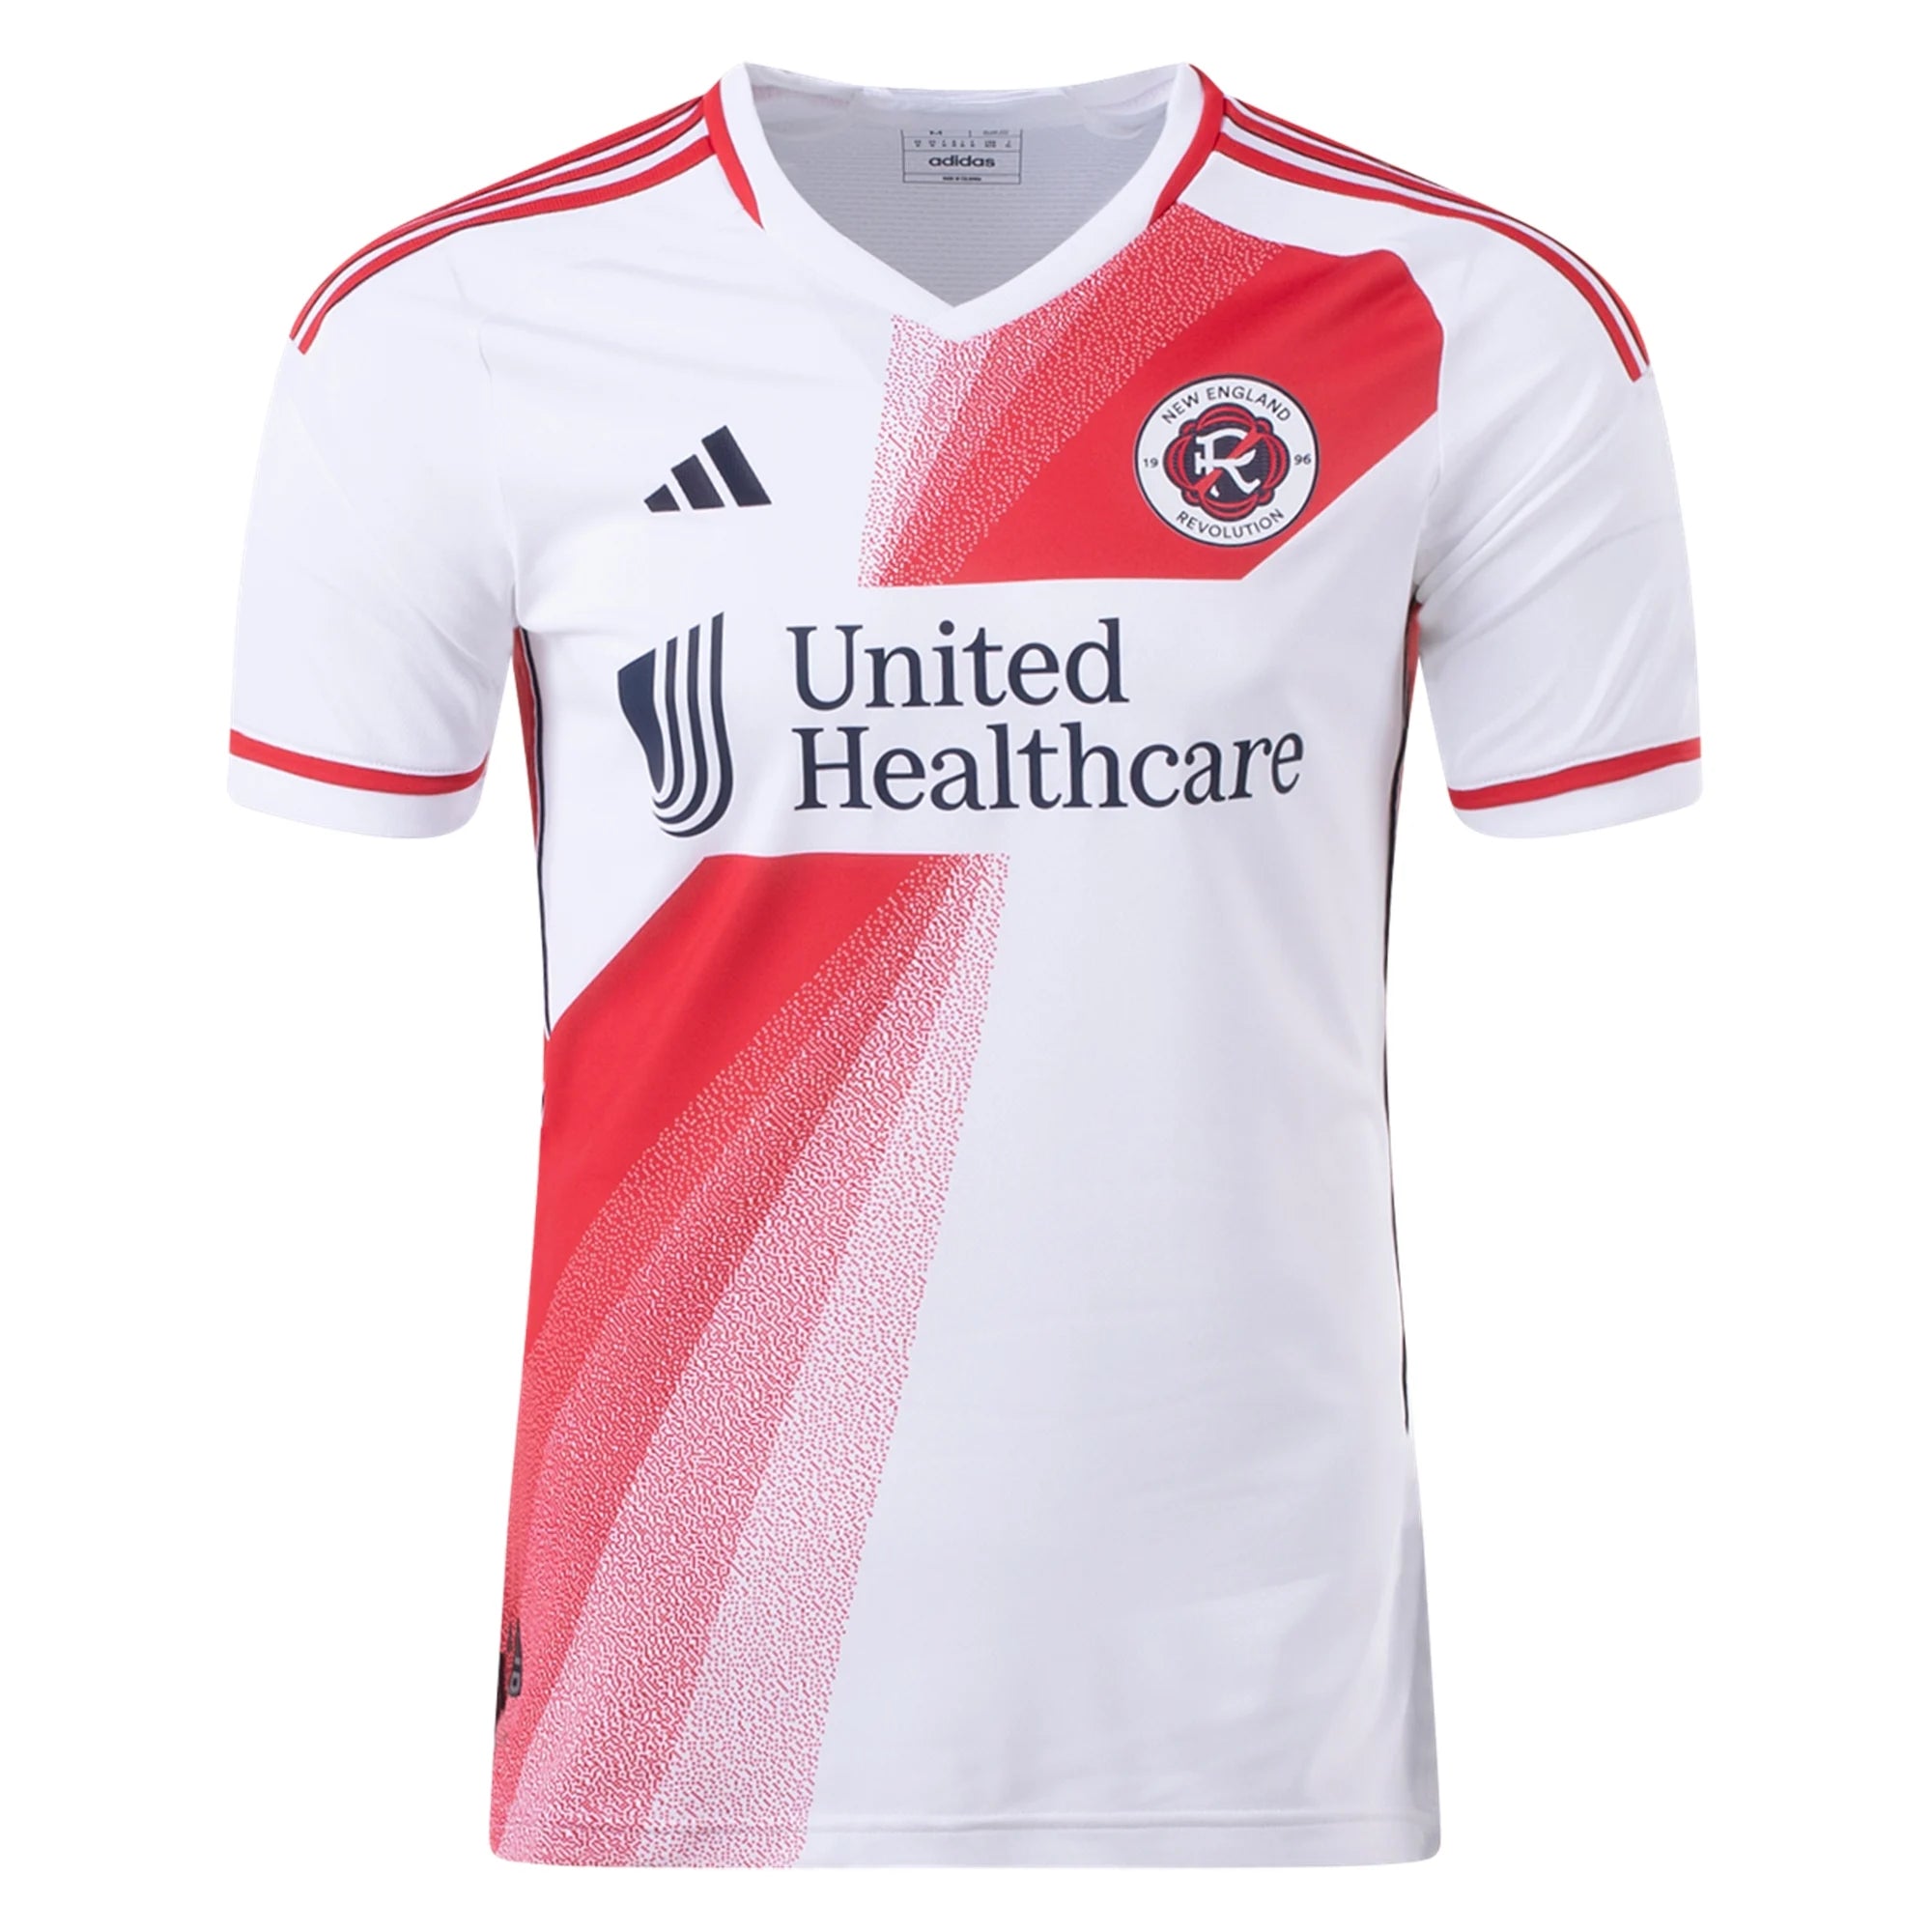 Is this jersey authentic : r/SoccerJerseys